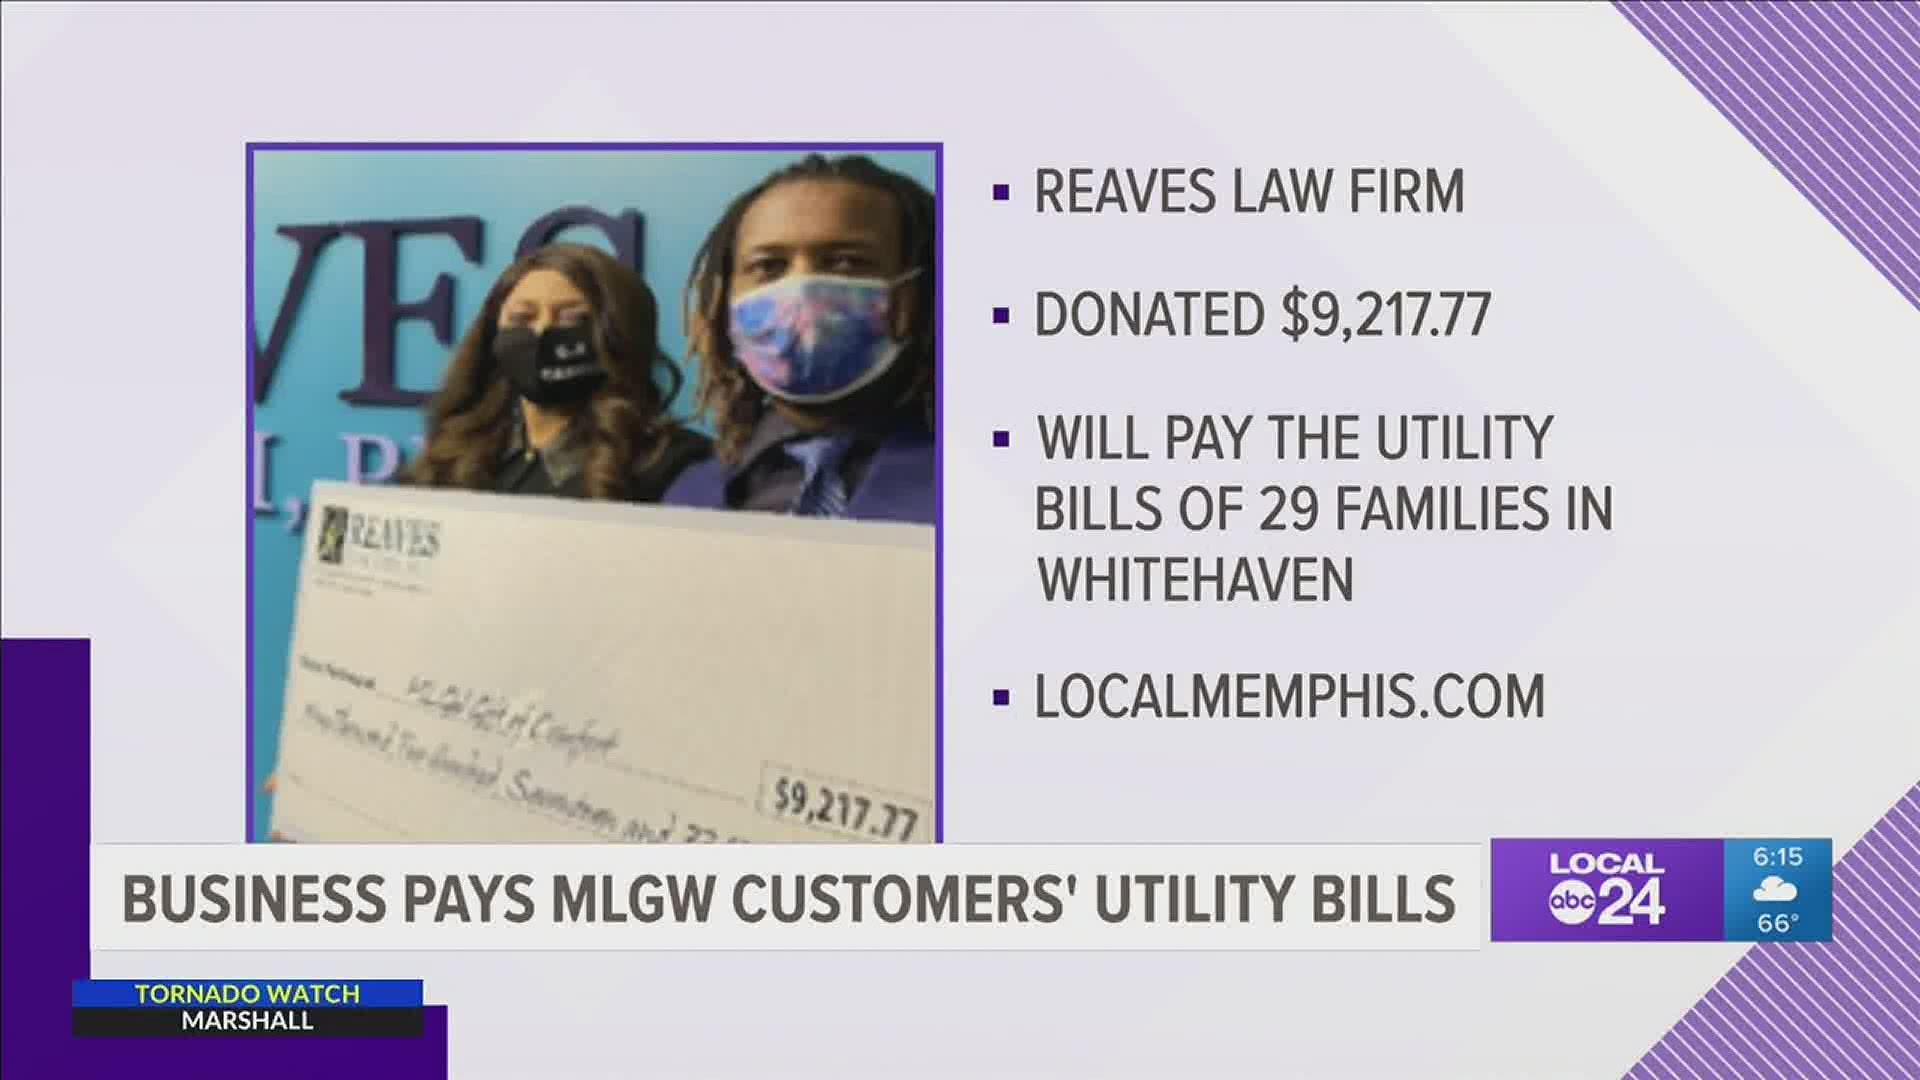 "Gift of Comfort" helps those that are struggling to pay their MLGW bills during these hard times.